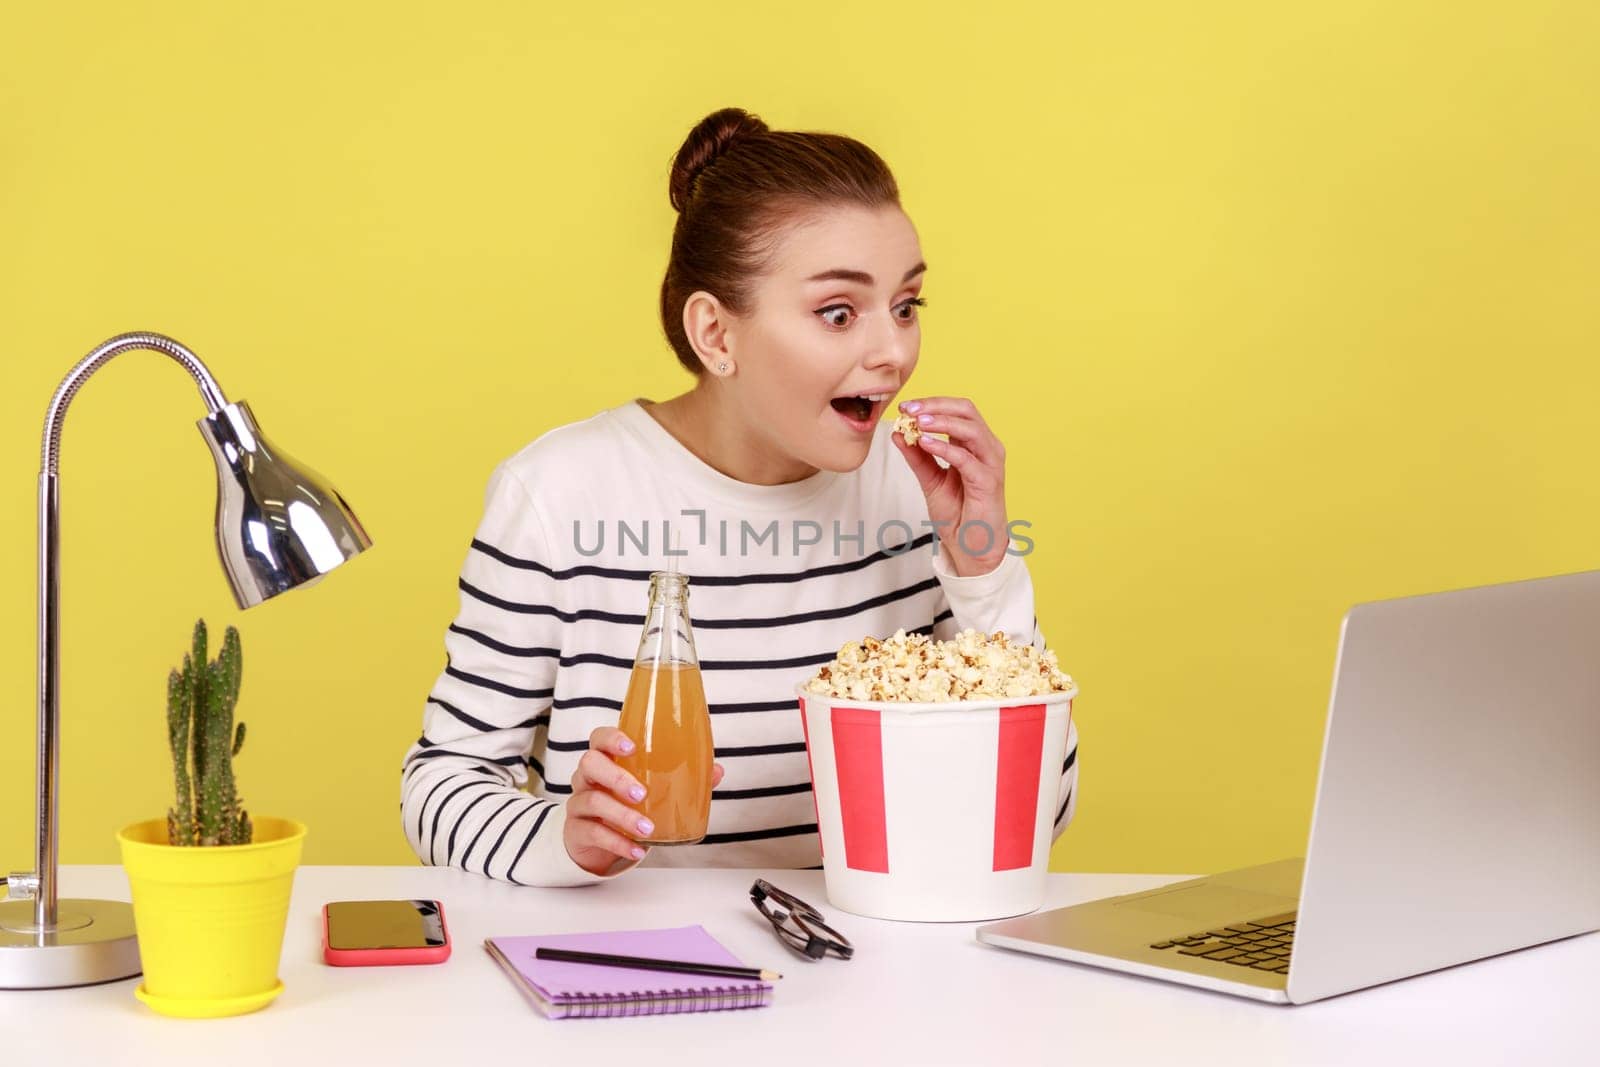 Happy excited woman sitting at workplace and watching movie during resting, eating popcorn, looking at laptop screen with open mouth. Indoor studio studio shot isolated on yellow background.